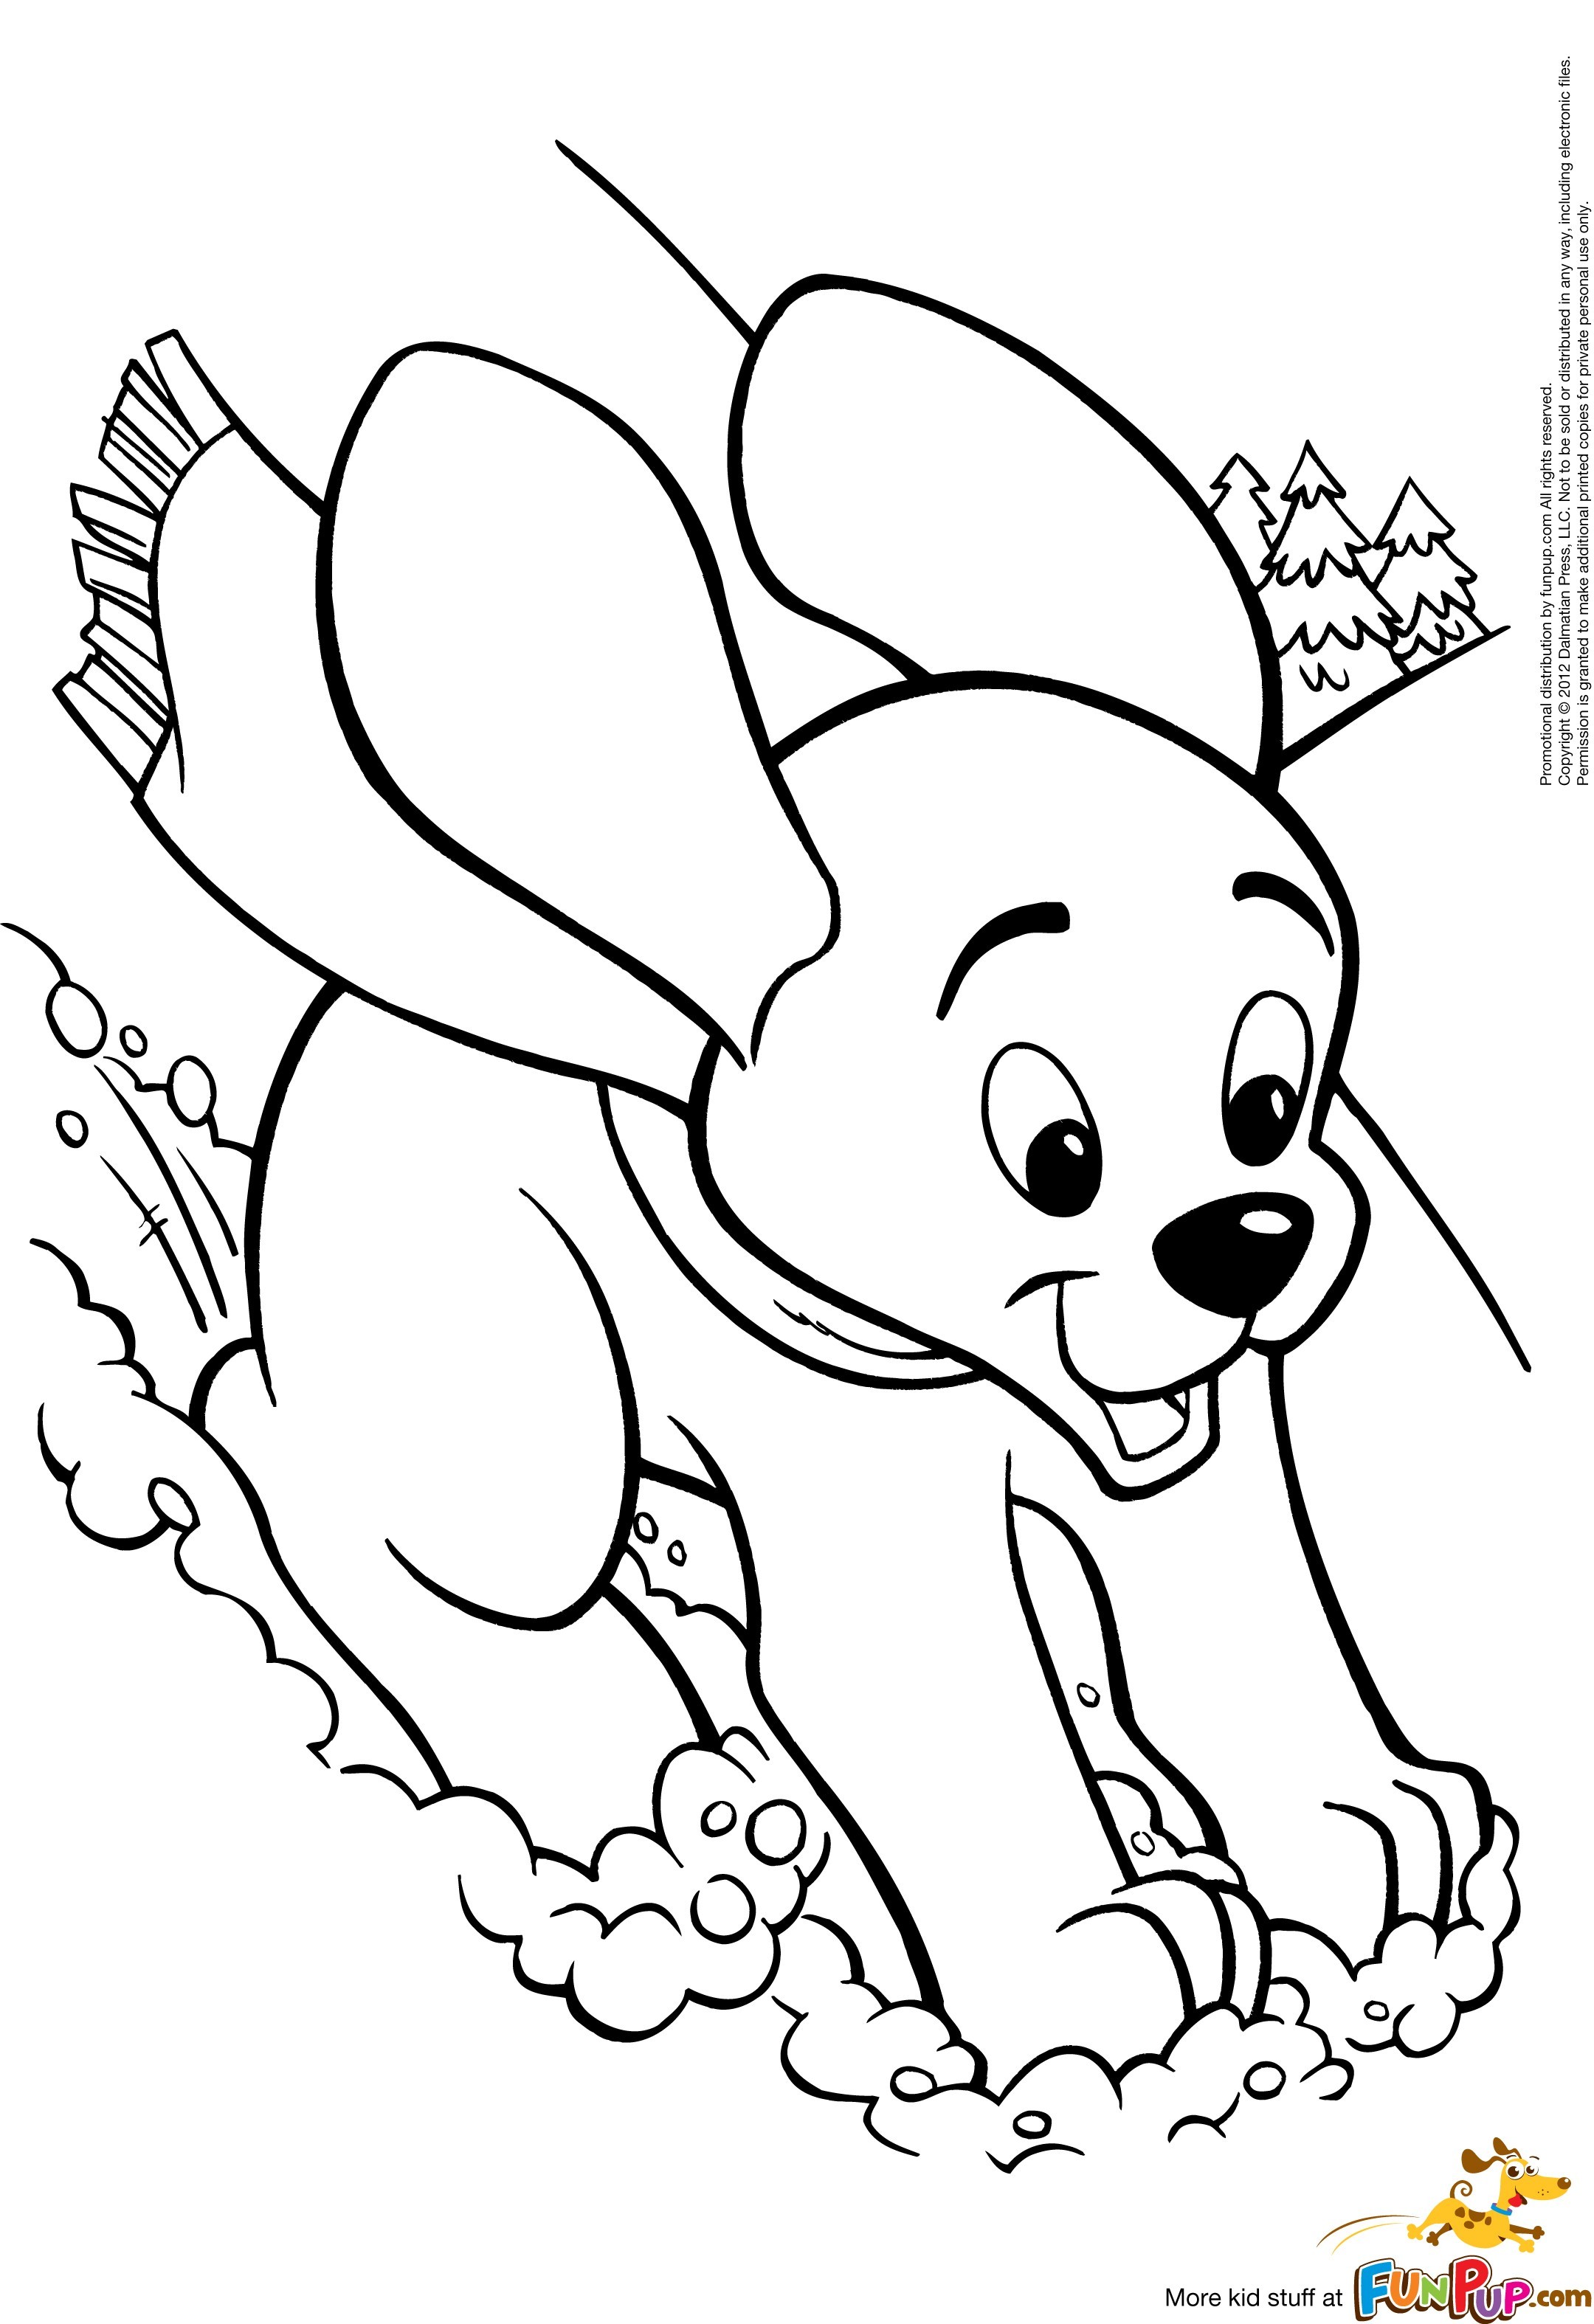 Cute Dog Coloring Pages For Kids at GetColorings.com ...